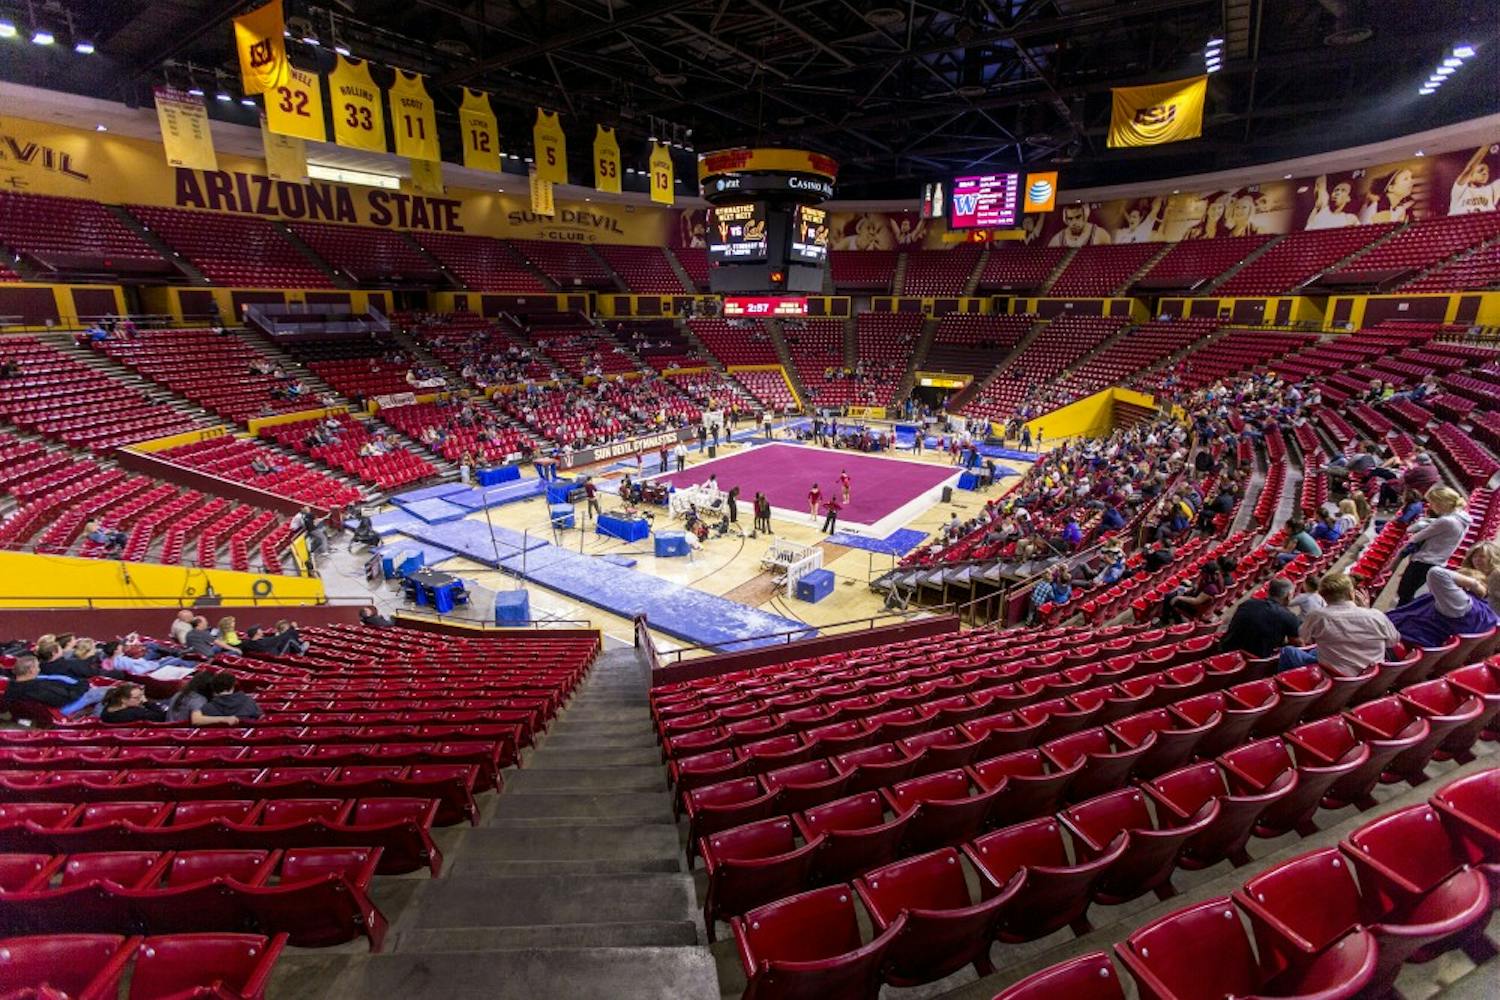 ASU hosts a gymnastics meet with the University of Washington Huskies at Wells Fargo Arena in Tempe, Ariz., on Monday, Jan. 18, 2015. The Huskies posted a 194.650-192.450 victory over the Sun Devils.